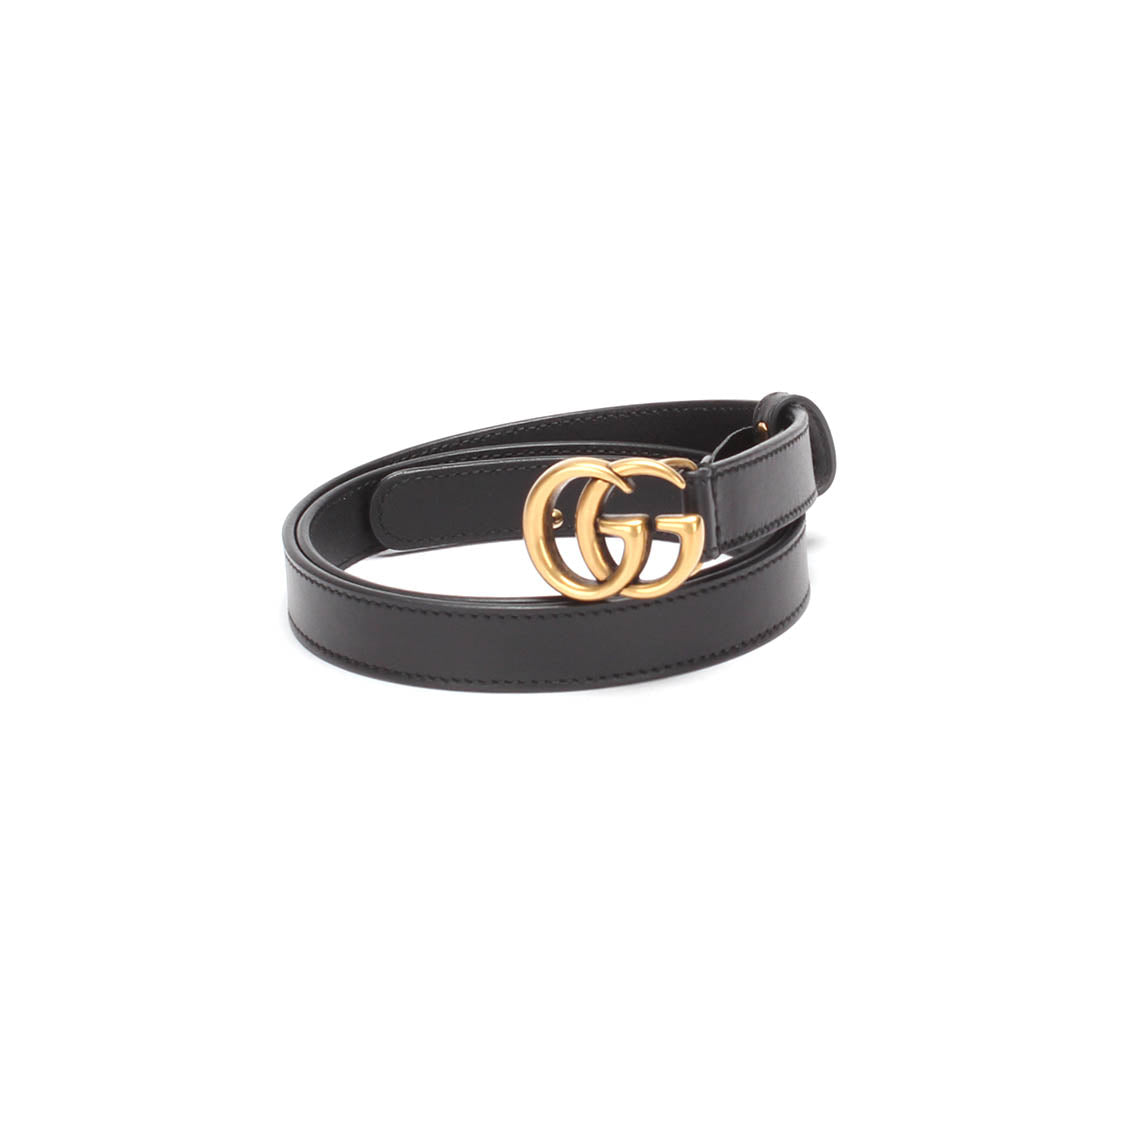 GG Marmont Leather Belt 493705